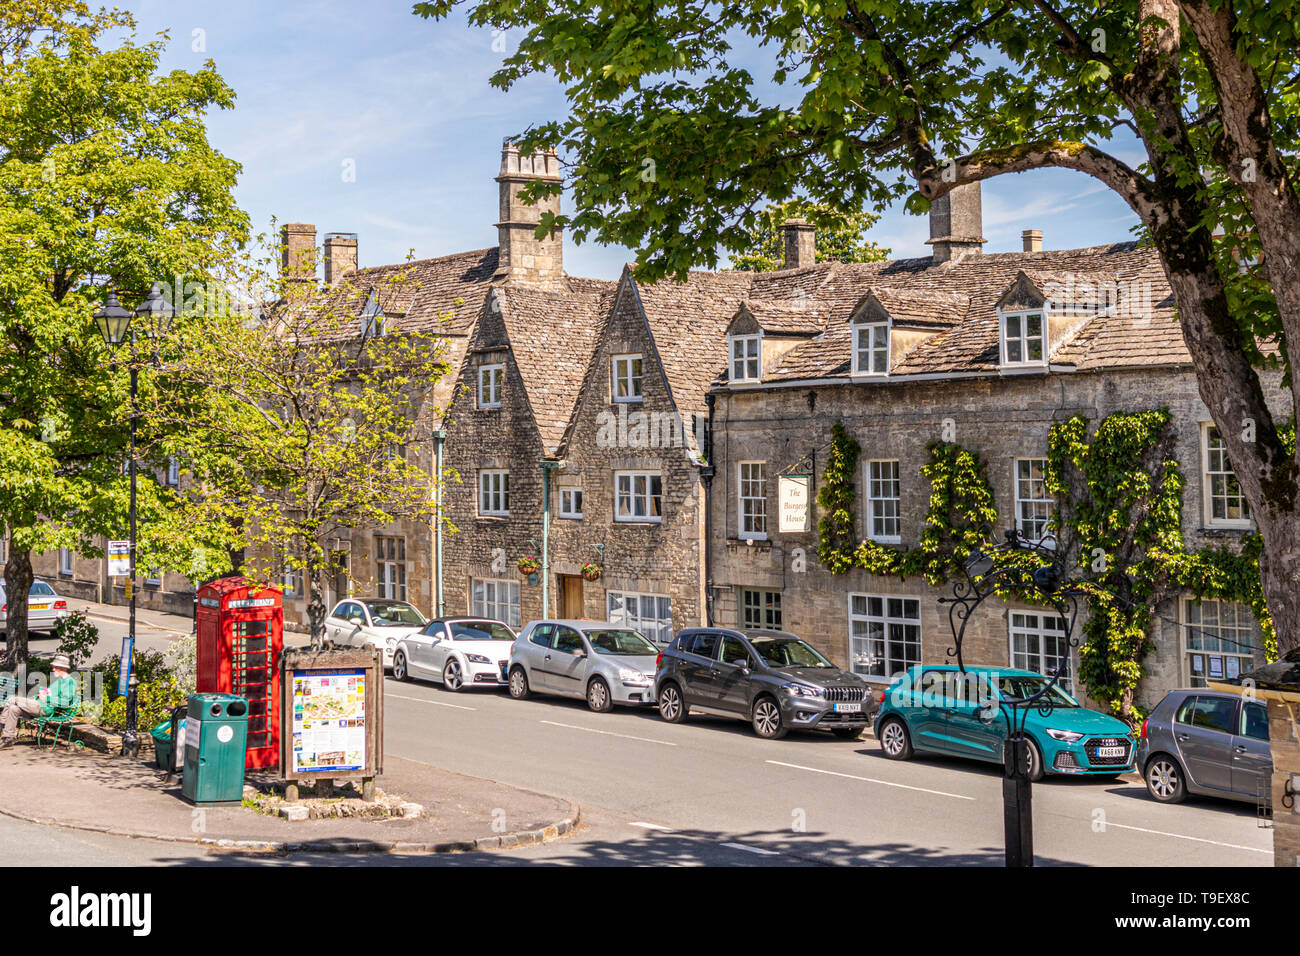 Old stone houses in the Market Place in the ancient Cotswold town of Northleach, Gloucestershire UK Stock Photo